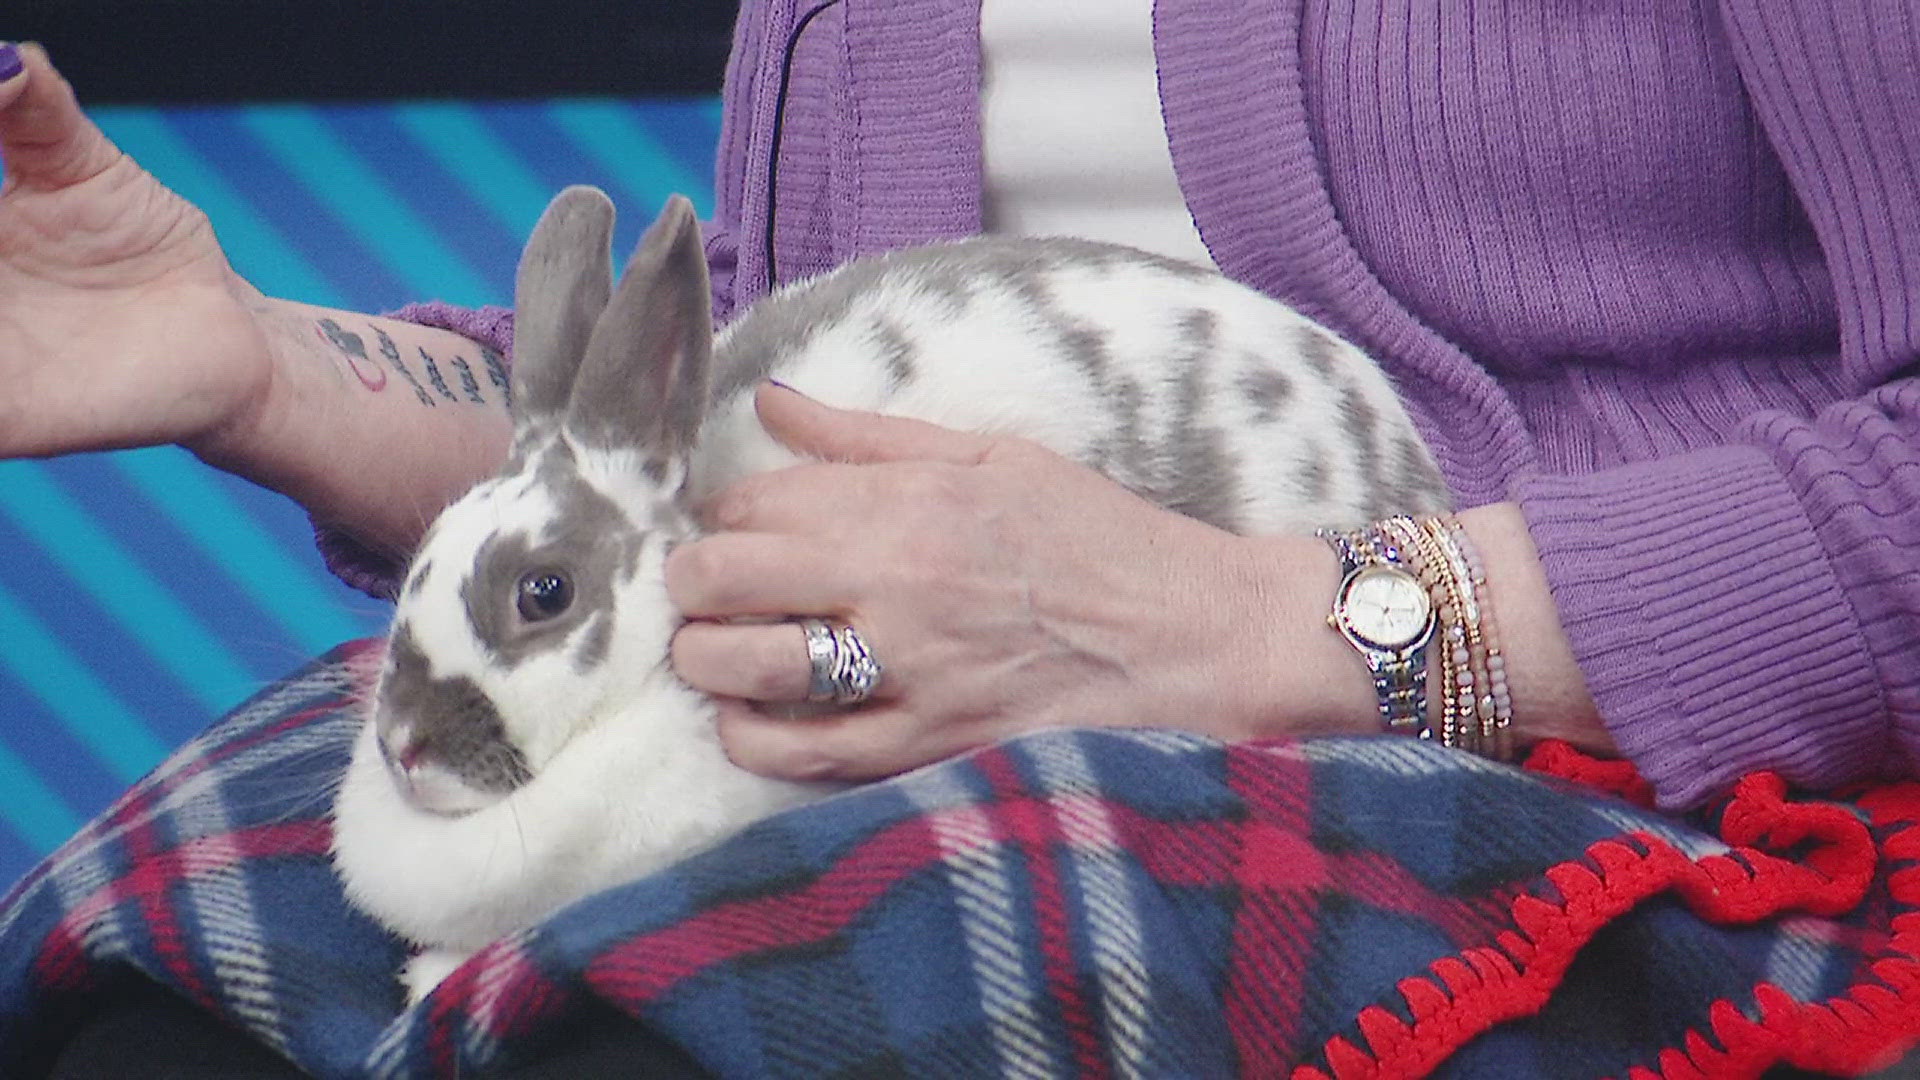 Patti McRae with the Quad Cities Animal Welfare Center brings JR and Lil Girl to the News 8 studio. JR and Lil Girl are a bonded pair of two-year-old female bunnies.